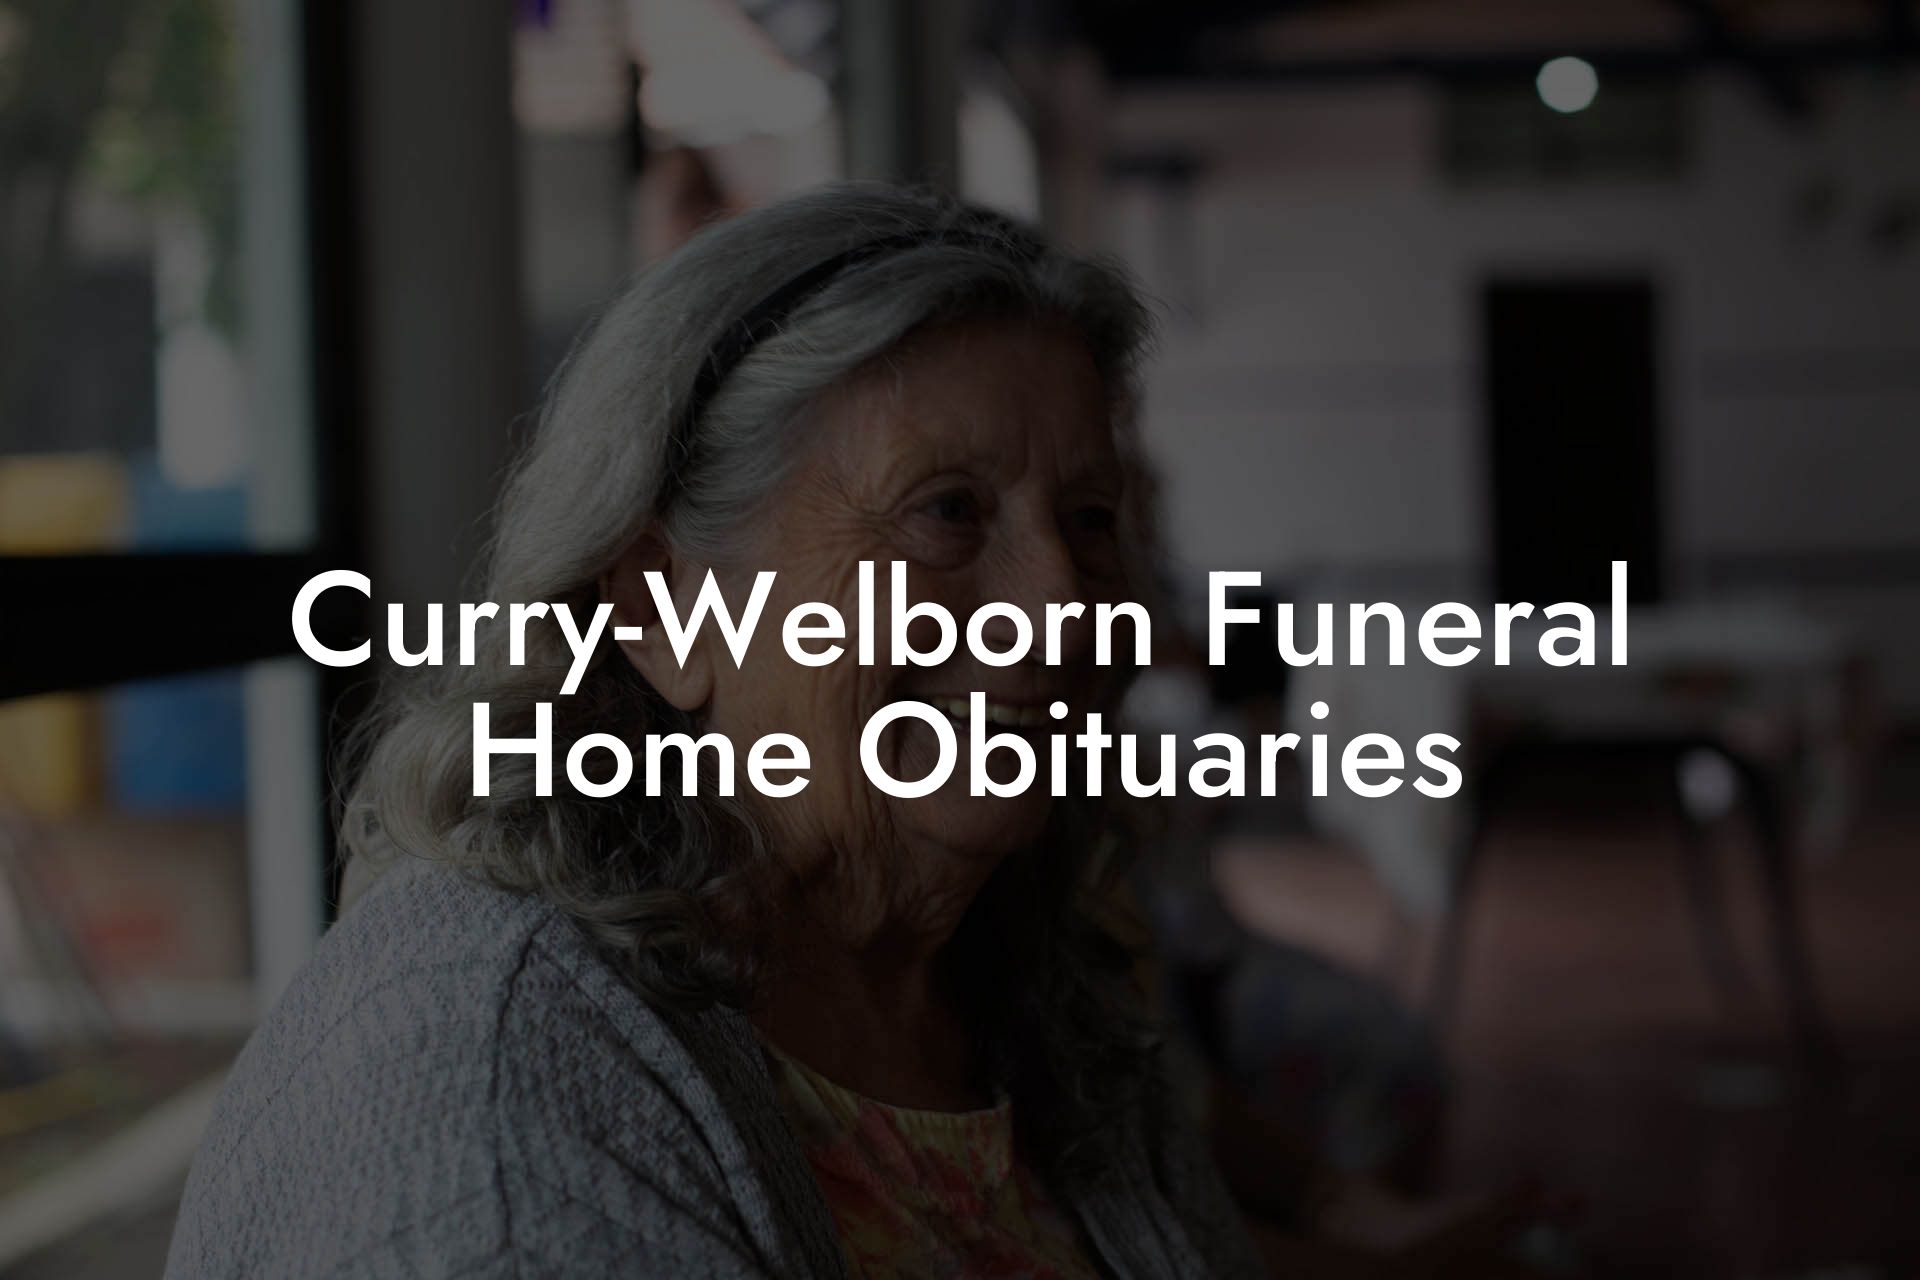 Curry-Welborn Funeral Home Obituaries